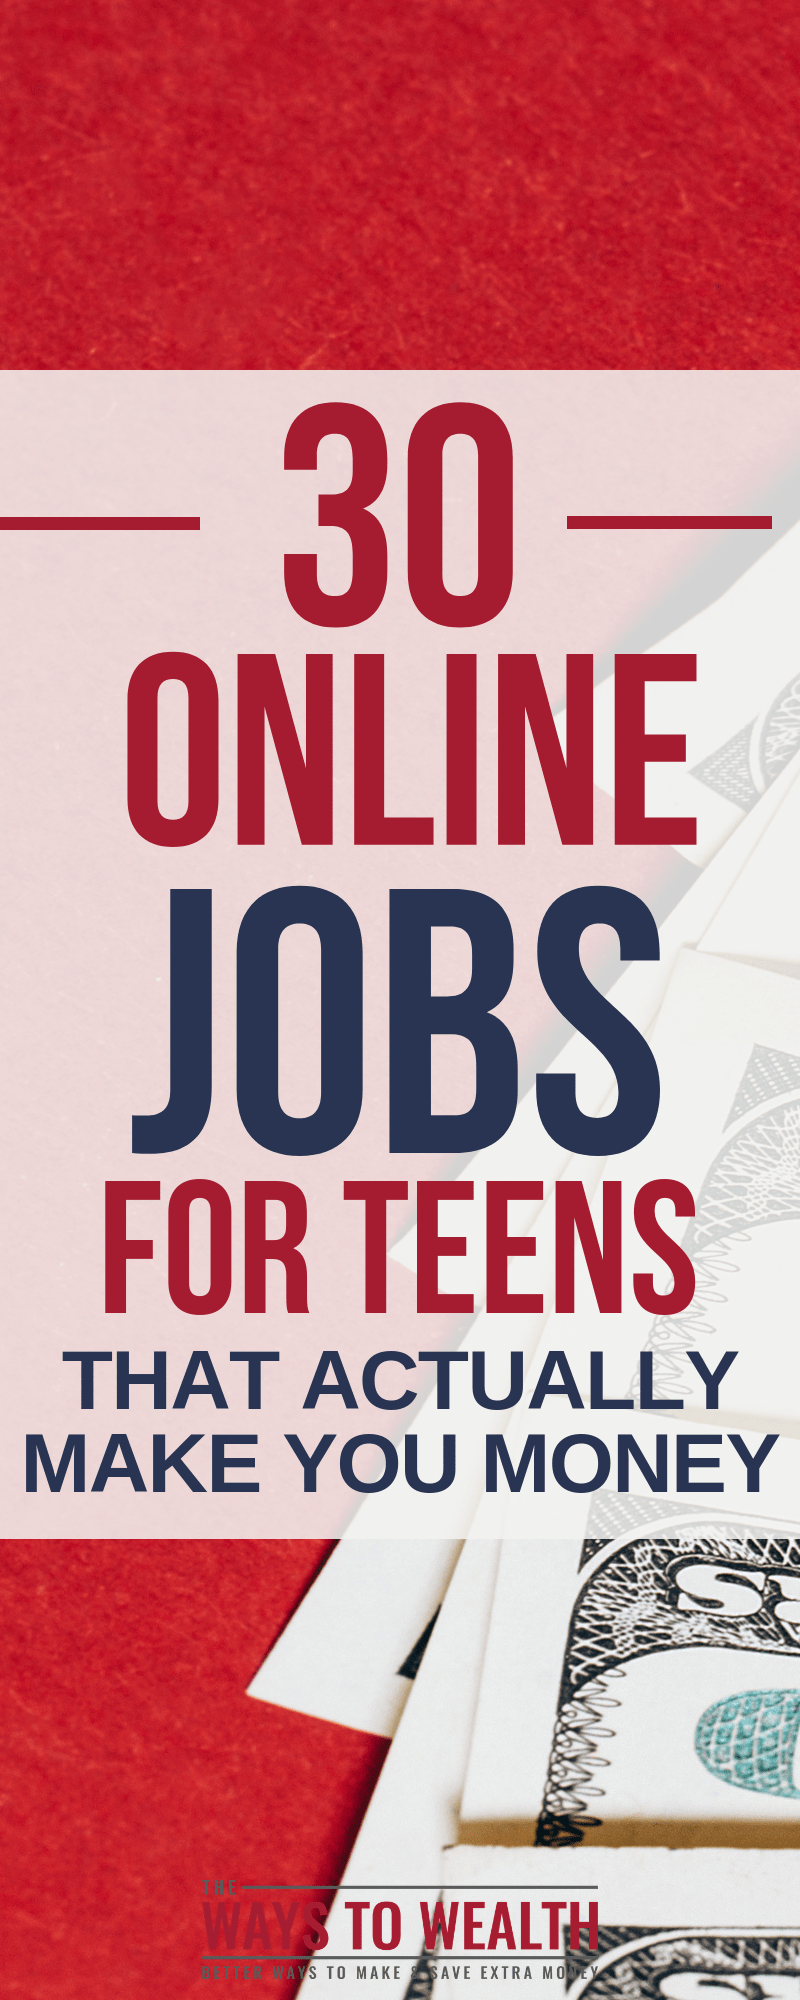 Jobs that pay 10 dollars an hour for teenagers